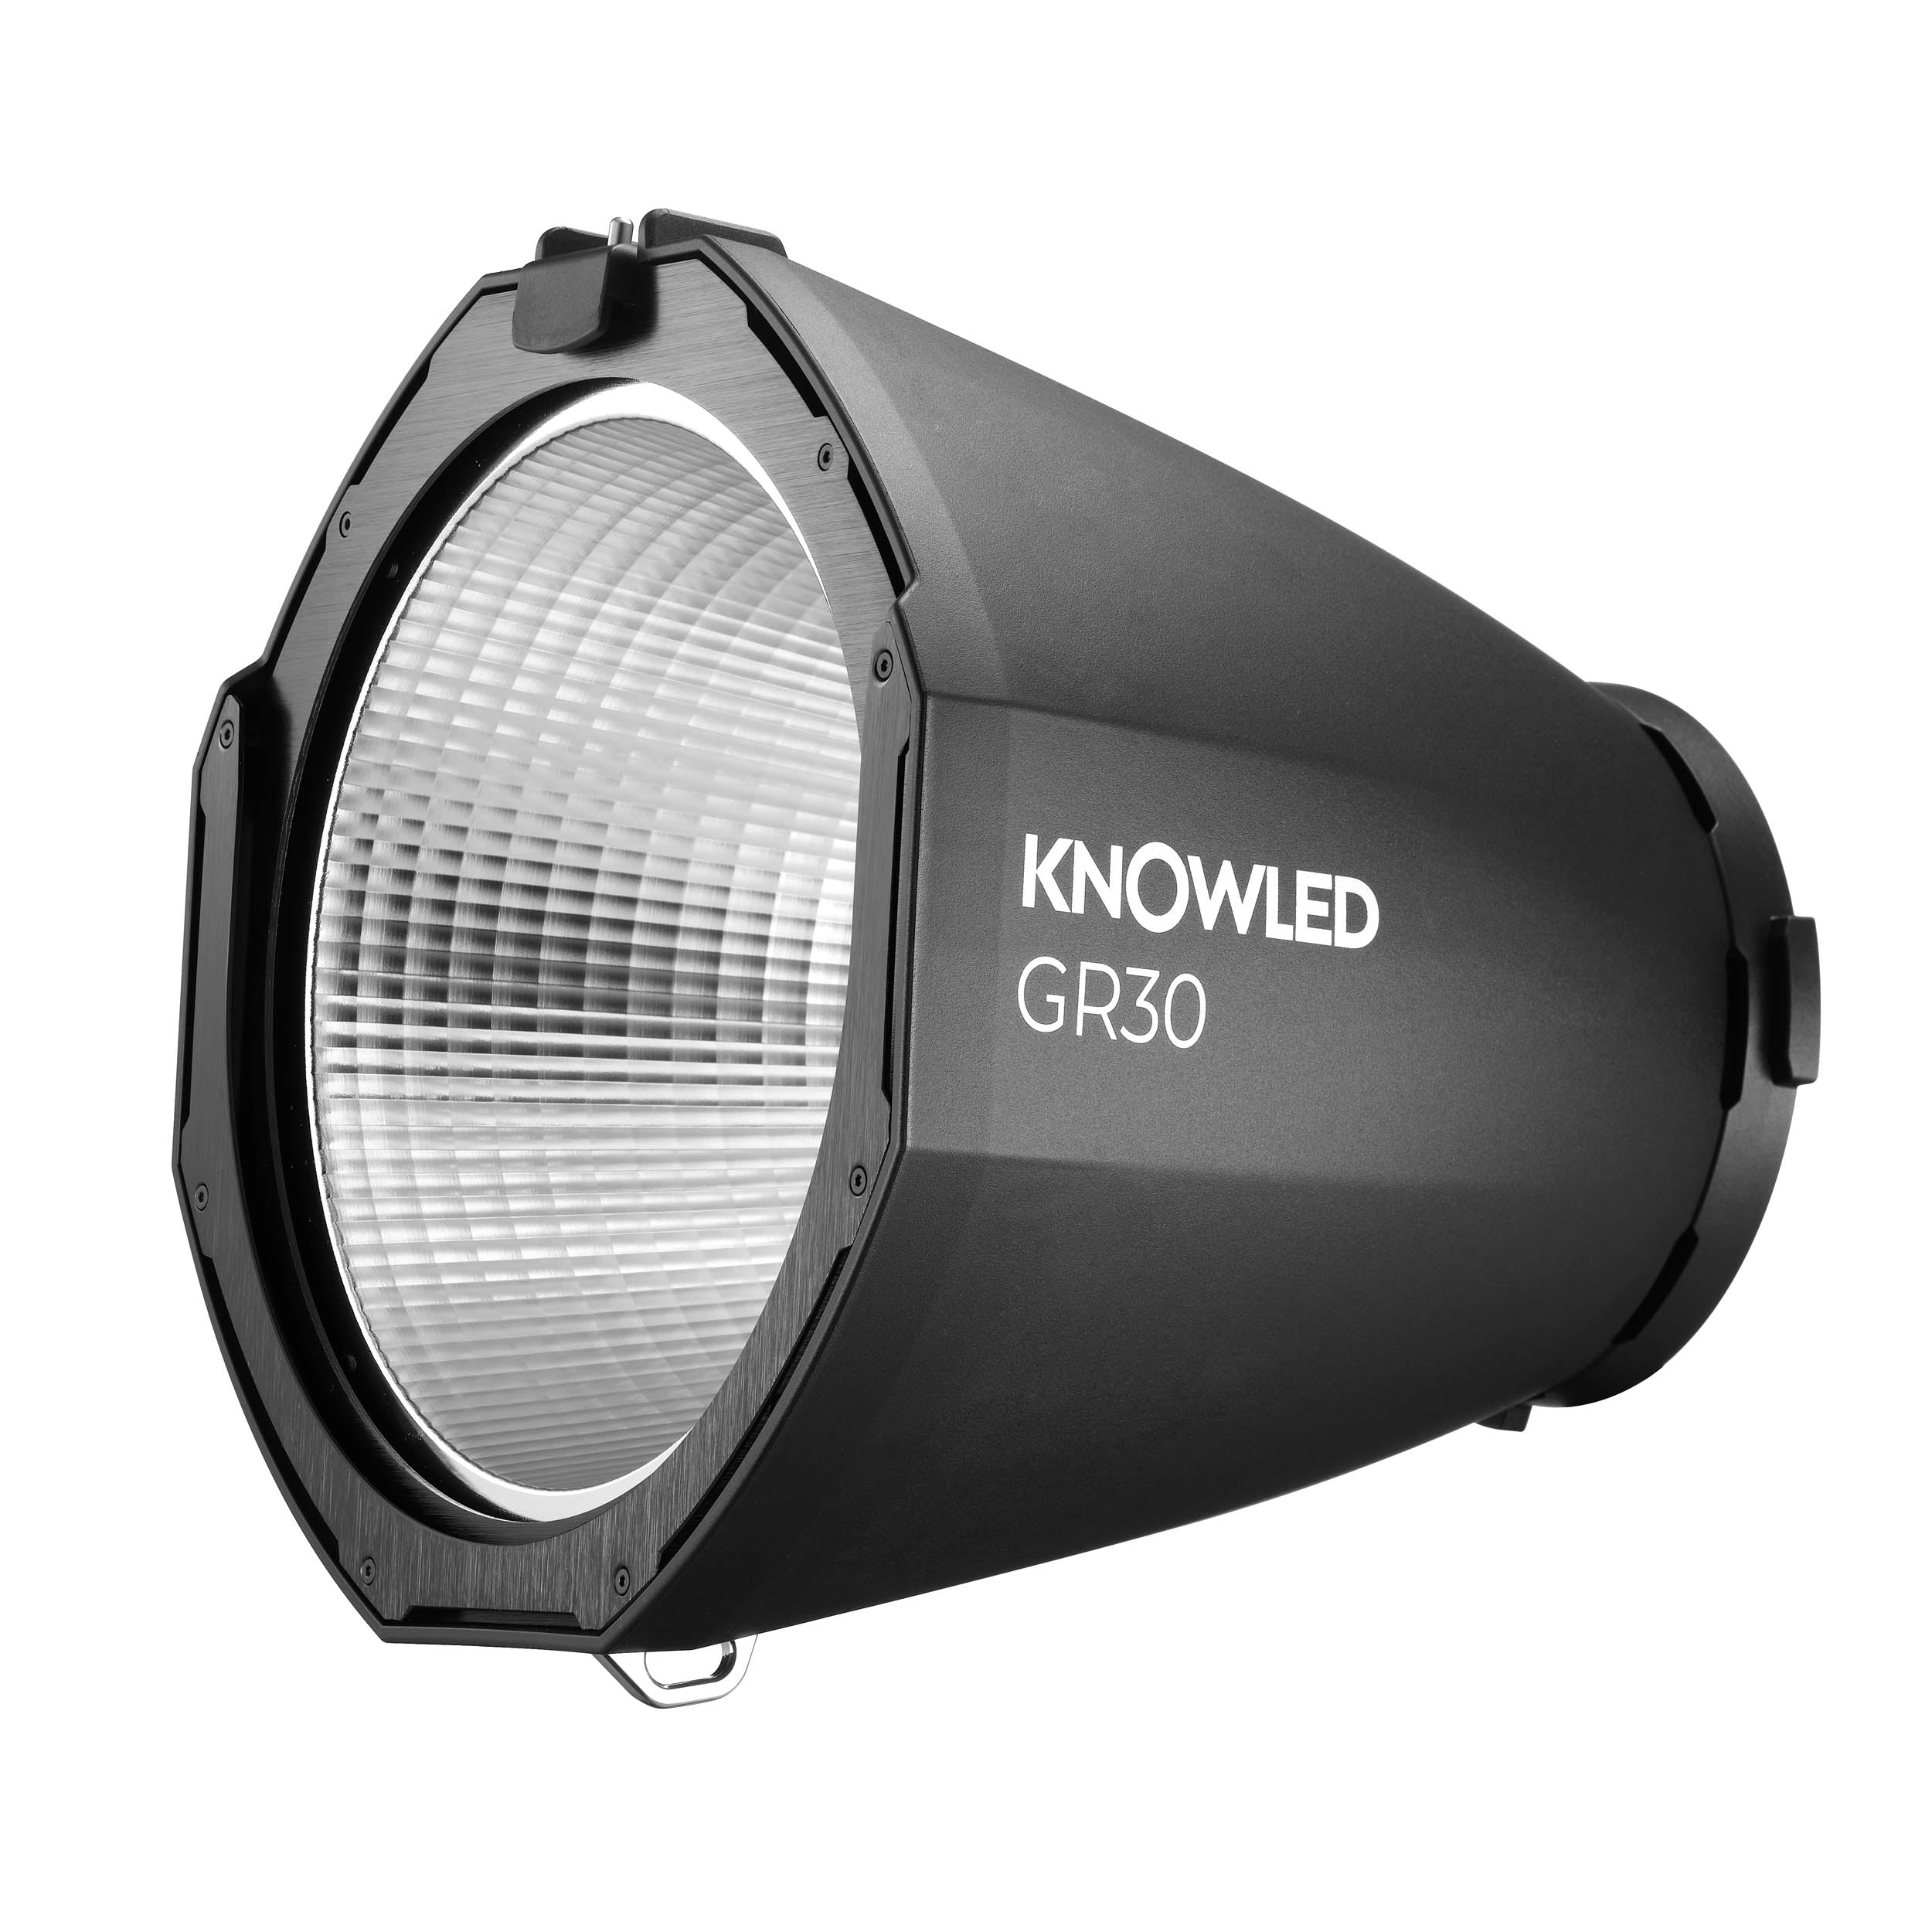 GR30 30-Degree G-Mount Reflector for KNOWLED MG1200Bi